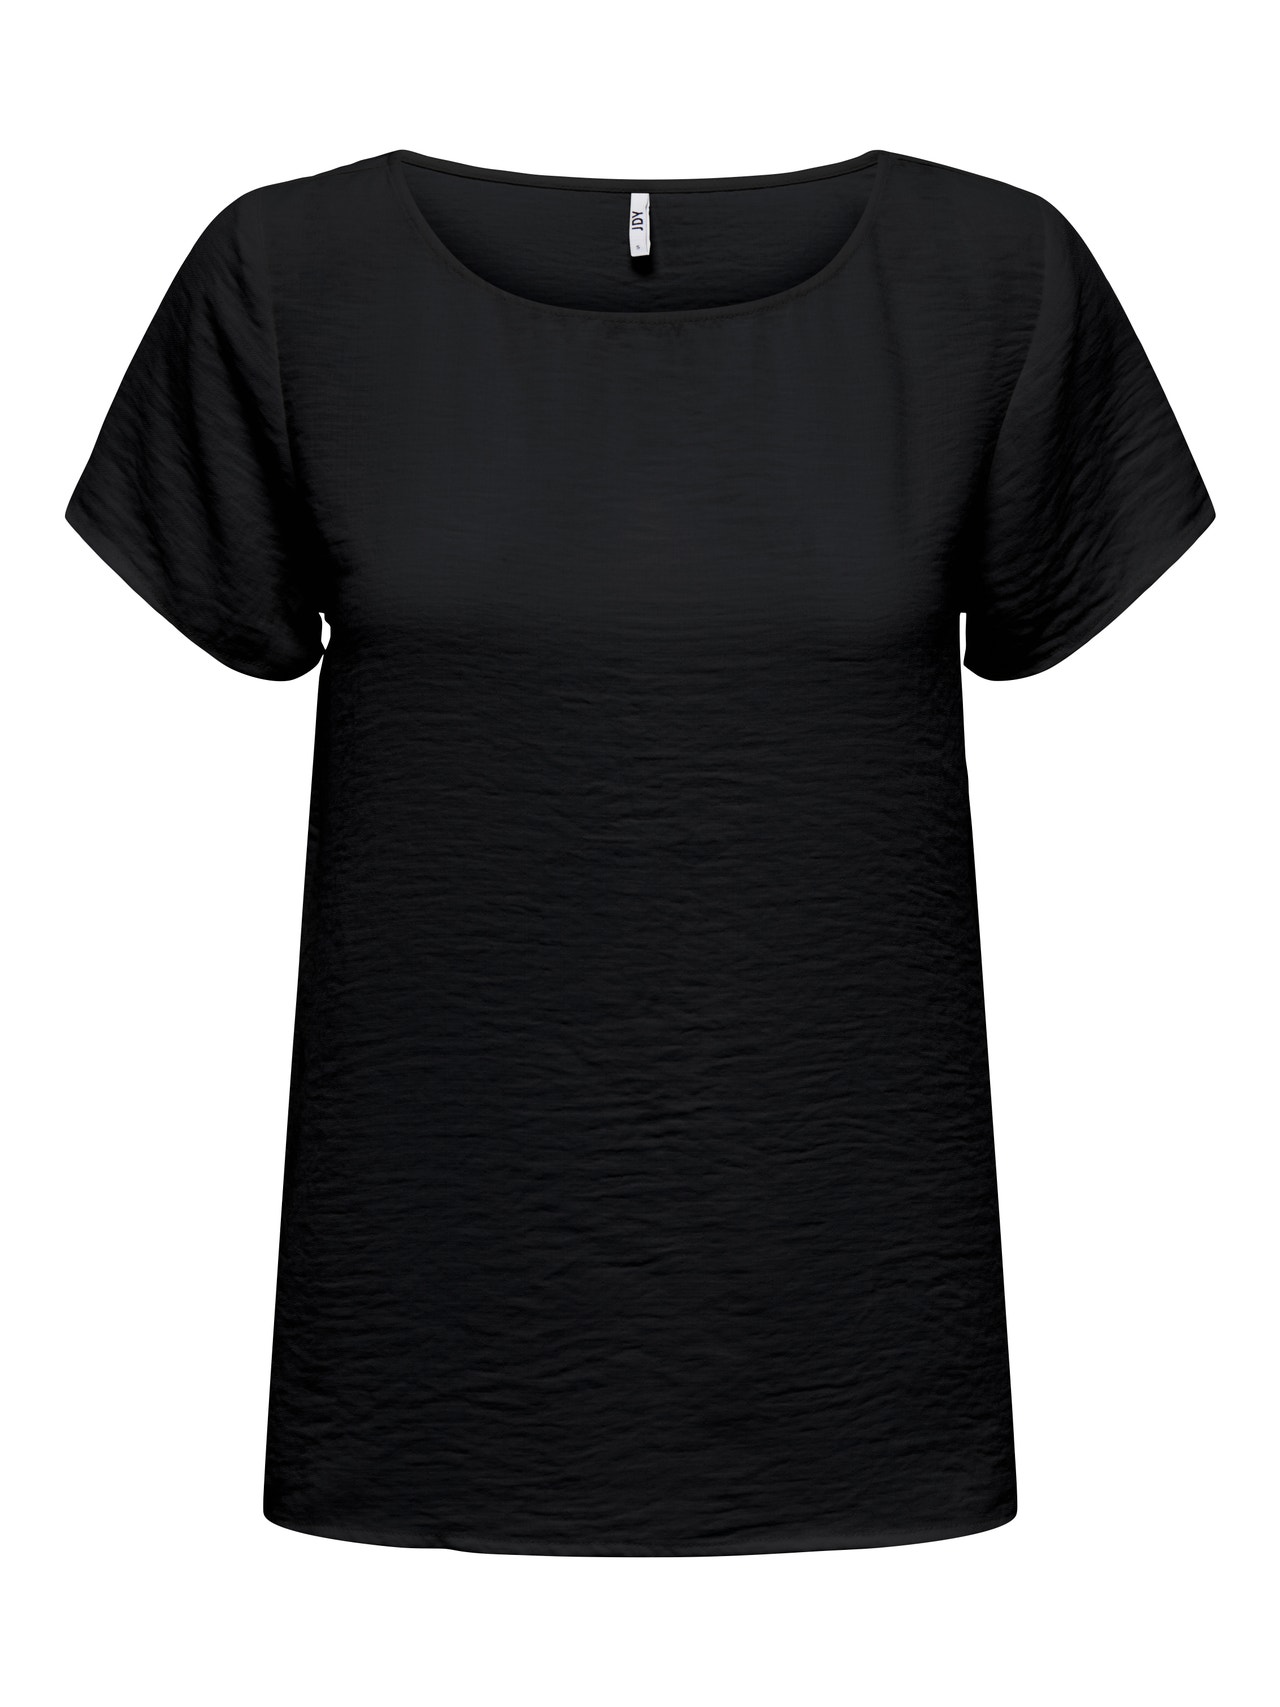 ONLY O-neck top -Black - 15300956